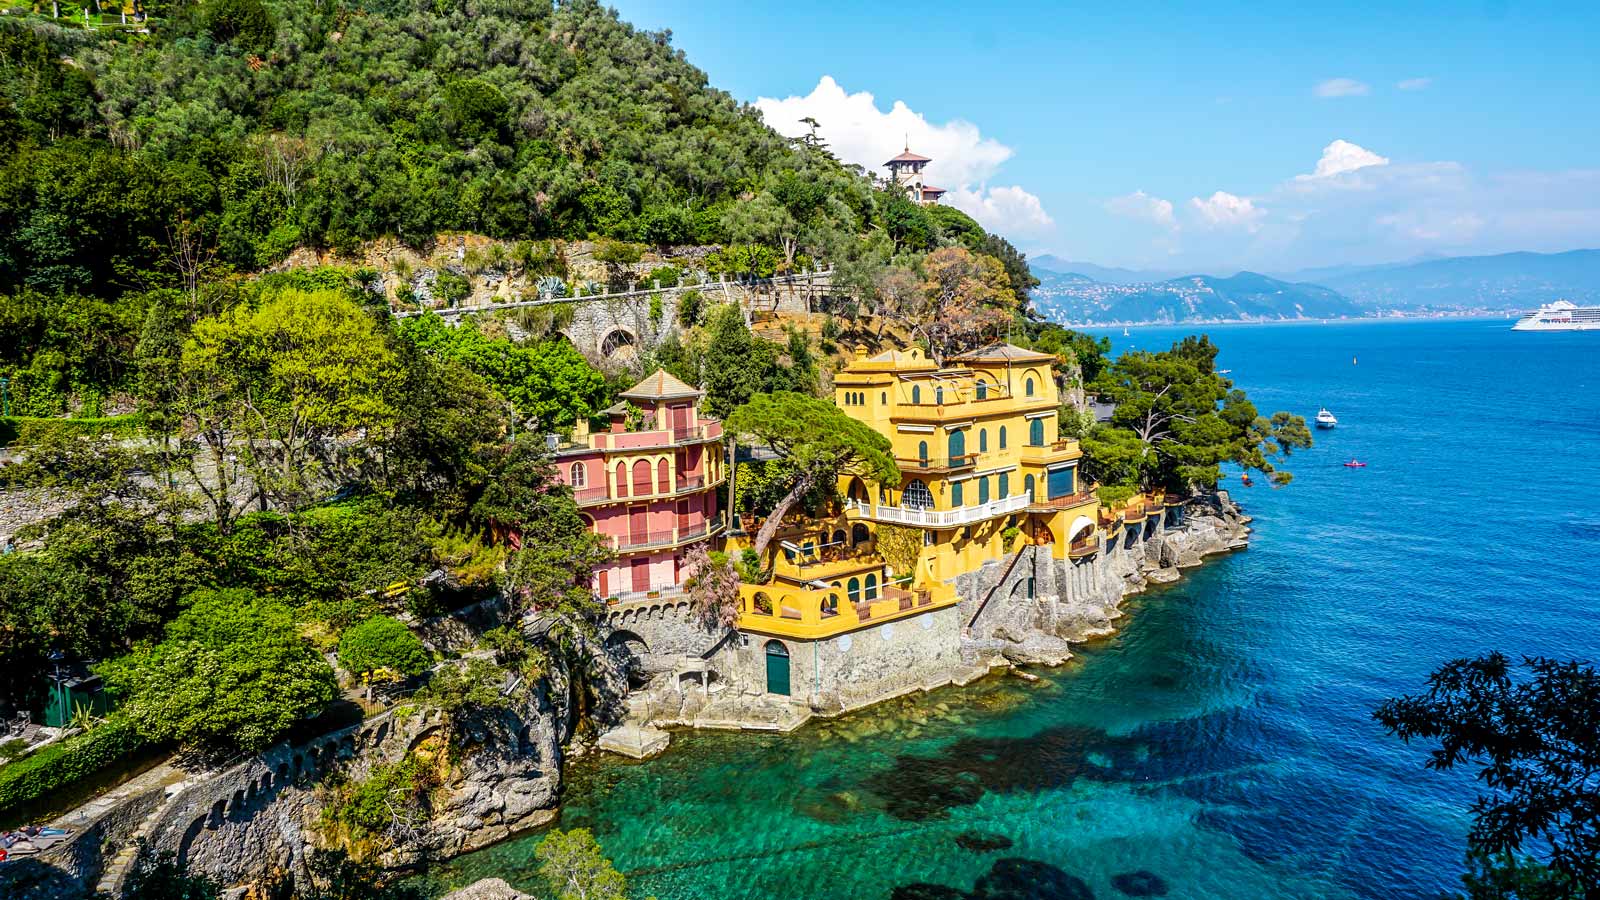 Positano Is Dead: This Little-Known Town Is Way Cooler